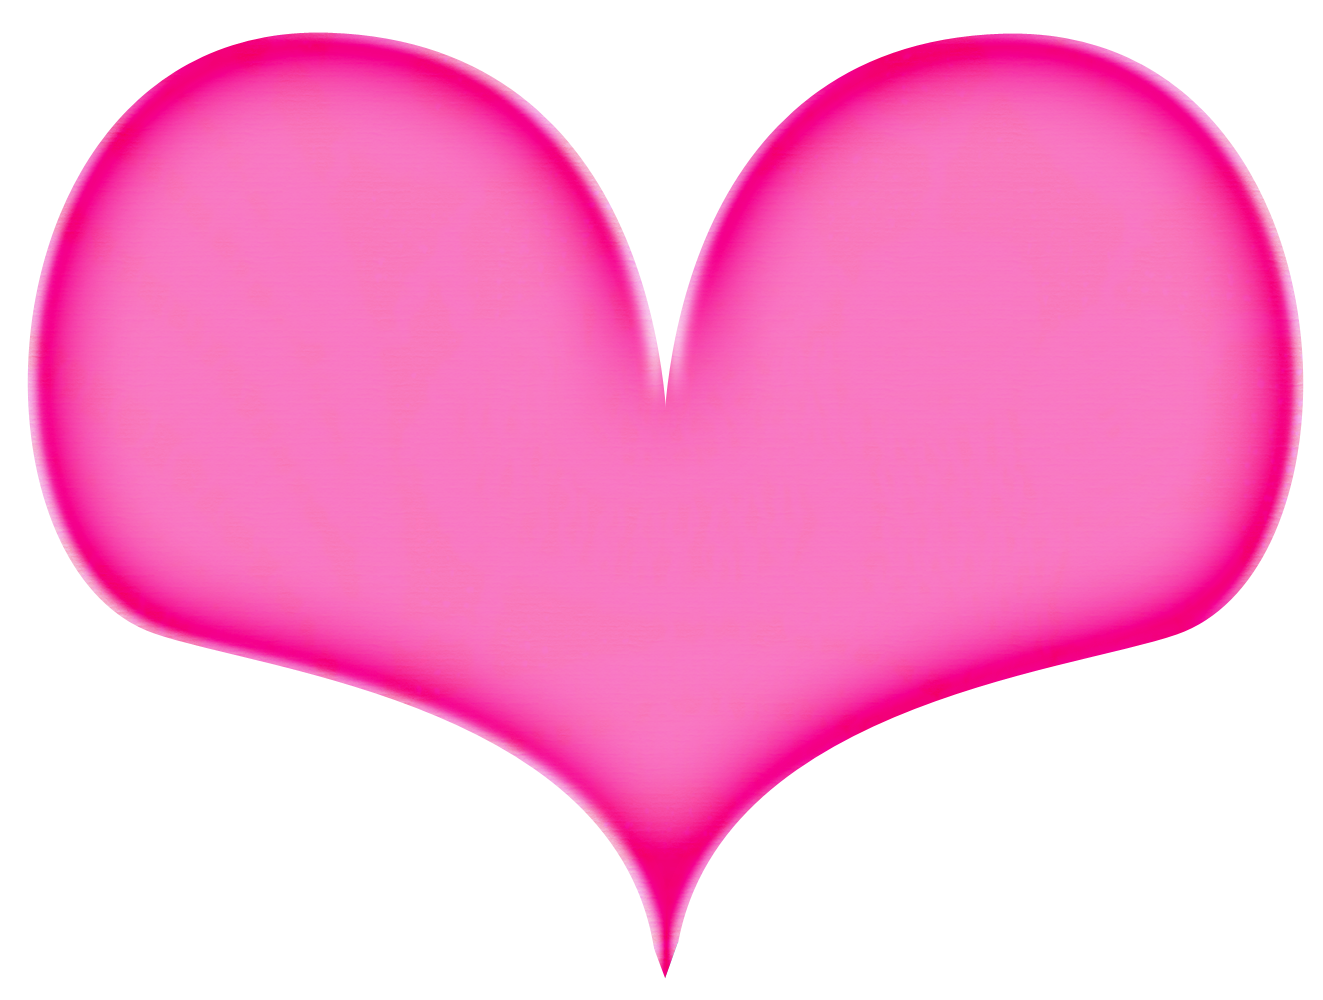 Hot Pink Heart File PNG Image